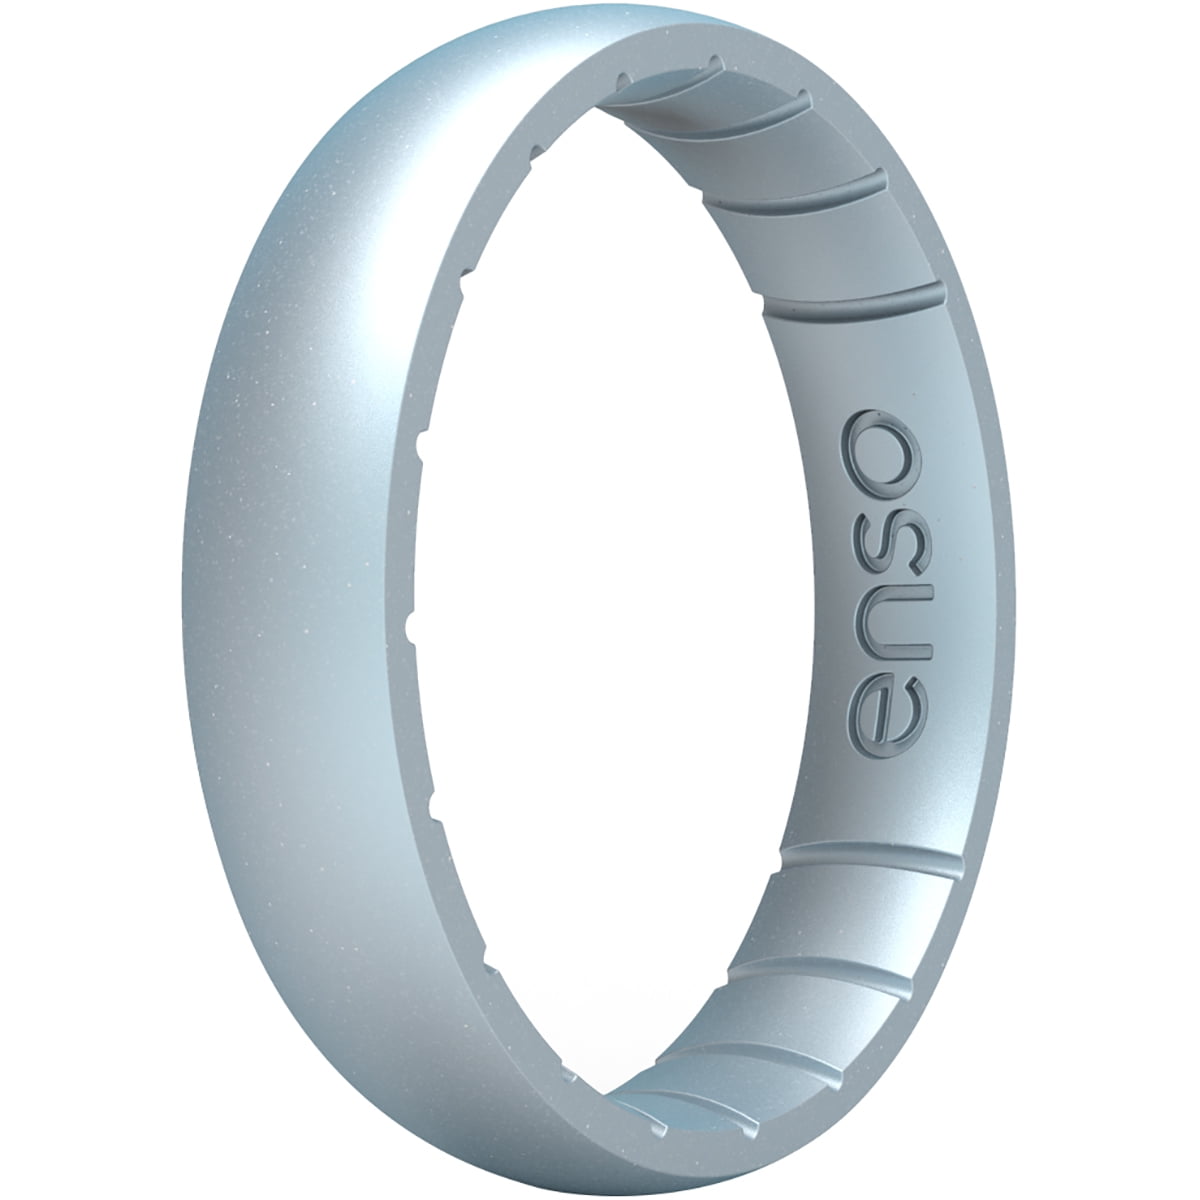 Enso Rings Thin Elements Series Silicone Ring - 7 - Diamond